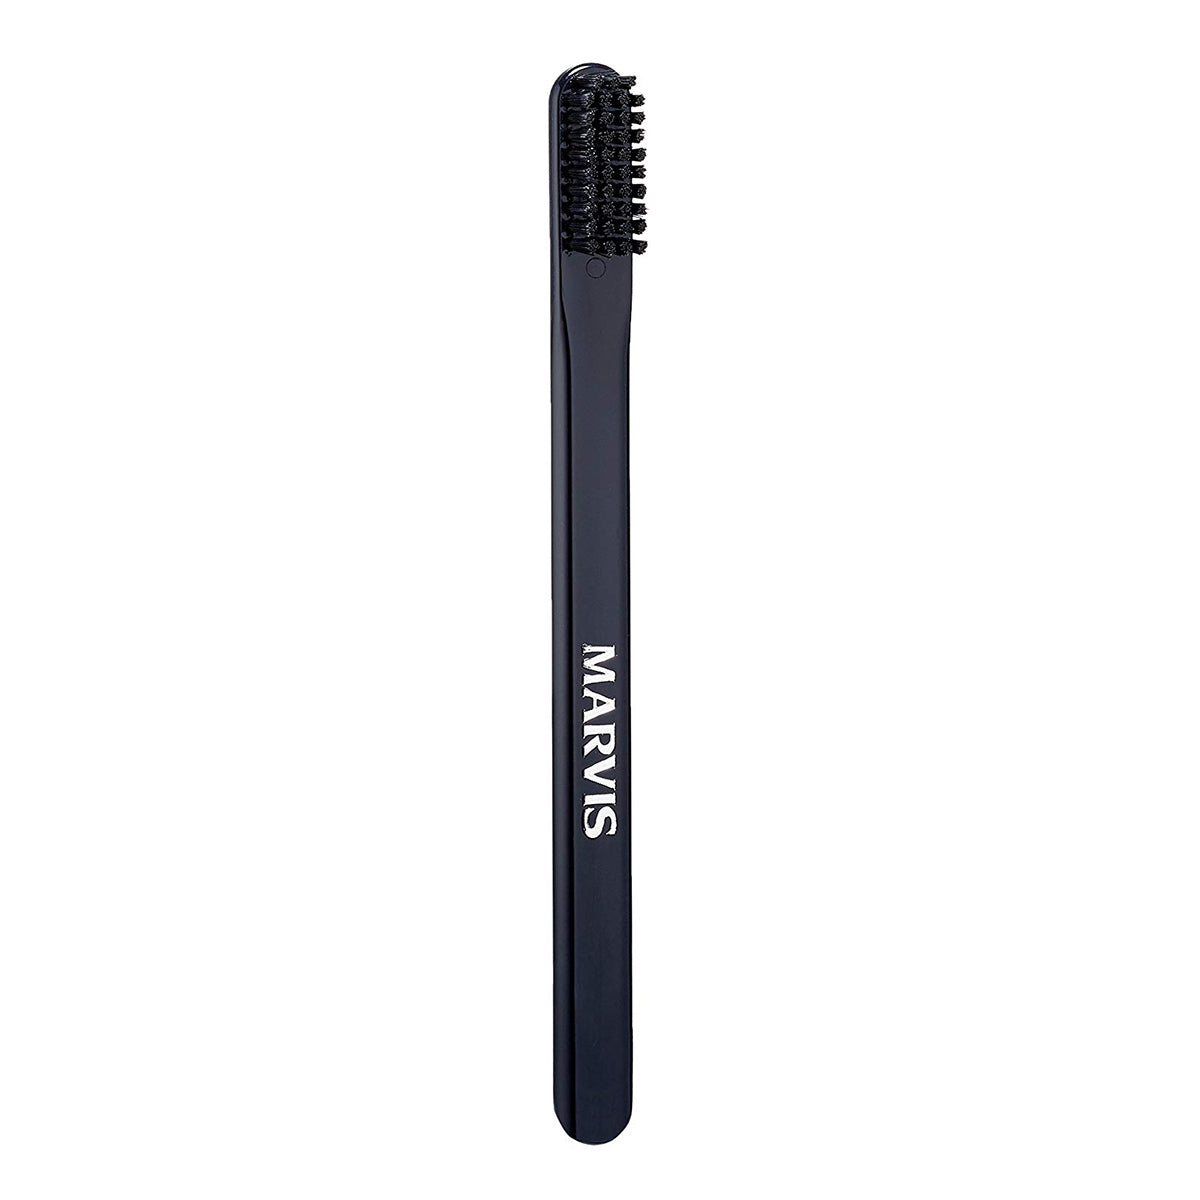 Primary image of Marvis Toothbrush